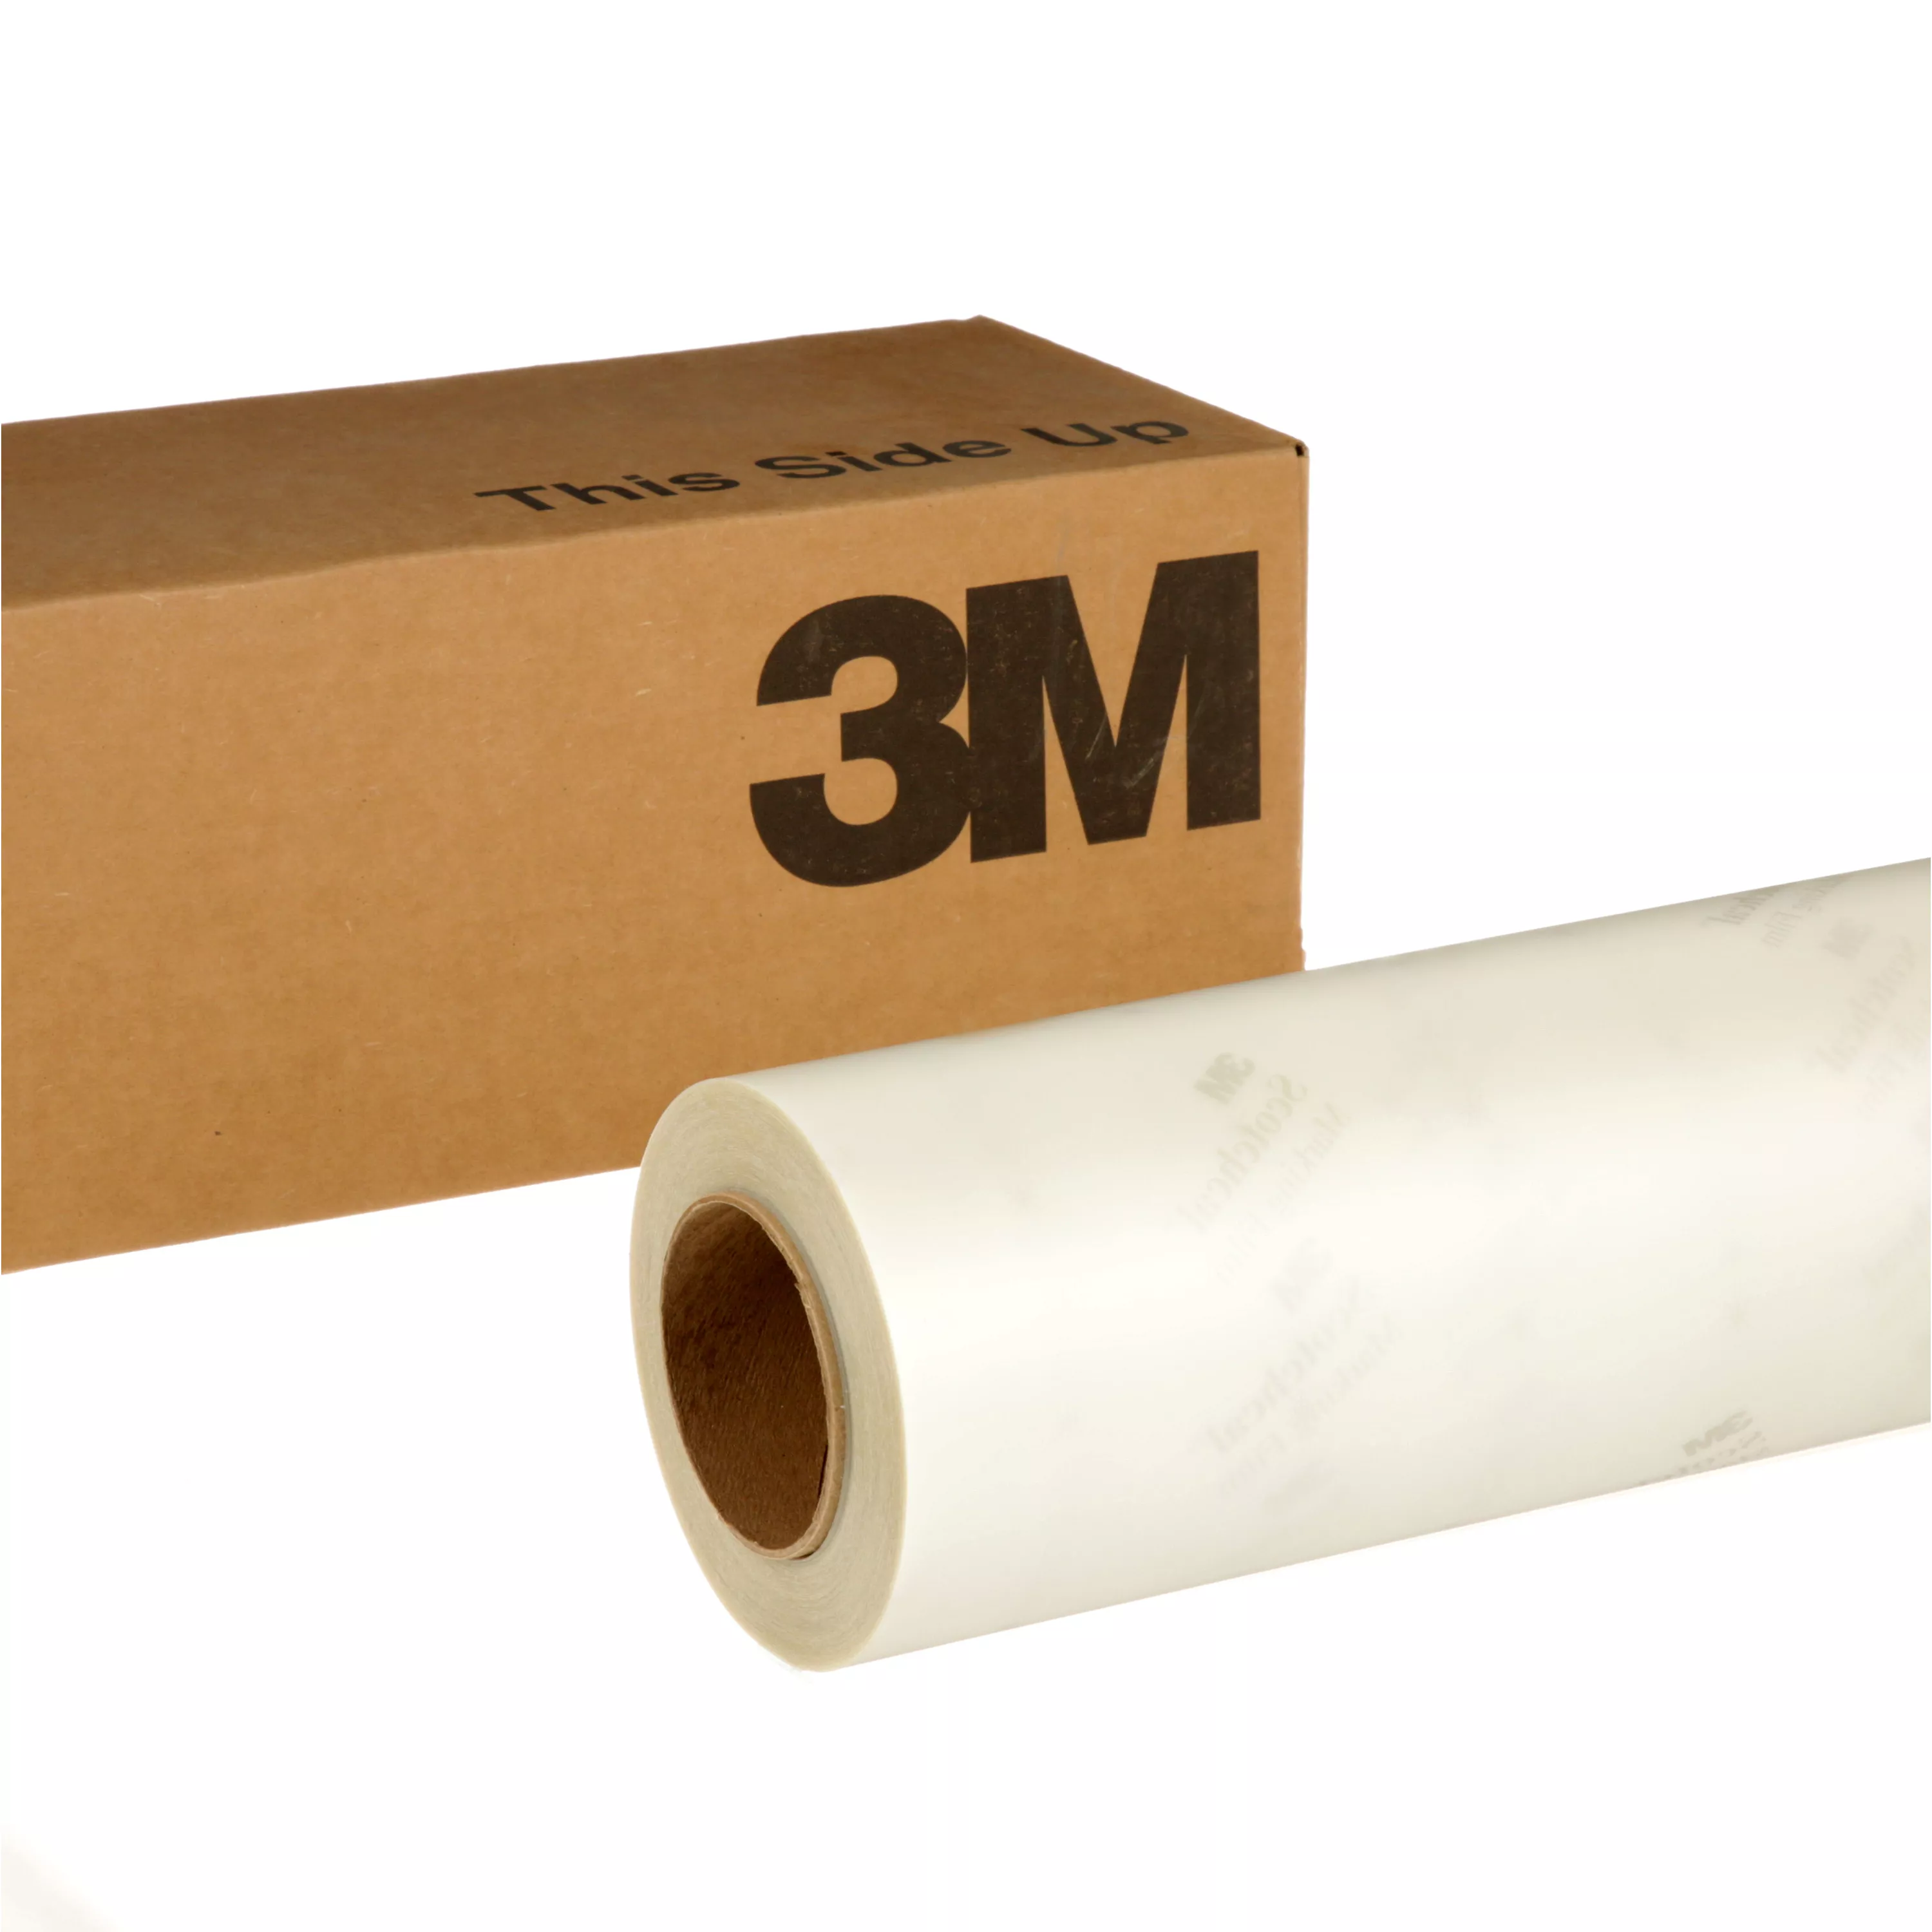 3M™ Crystal Glass Finishes 7725SE-314, Dusted Crystal, 48 in x 150 ft, 1
Roll/Case